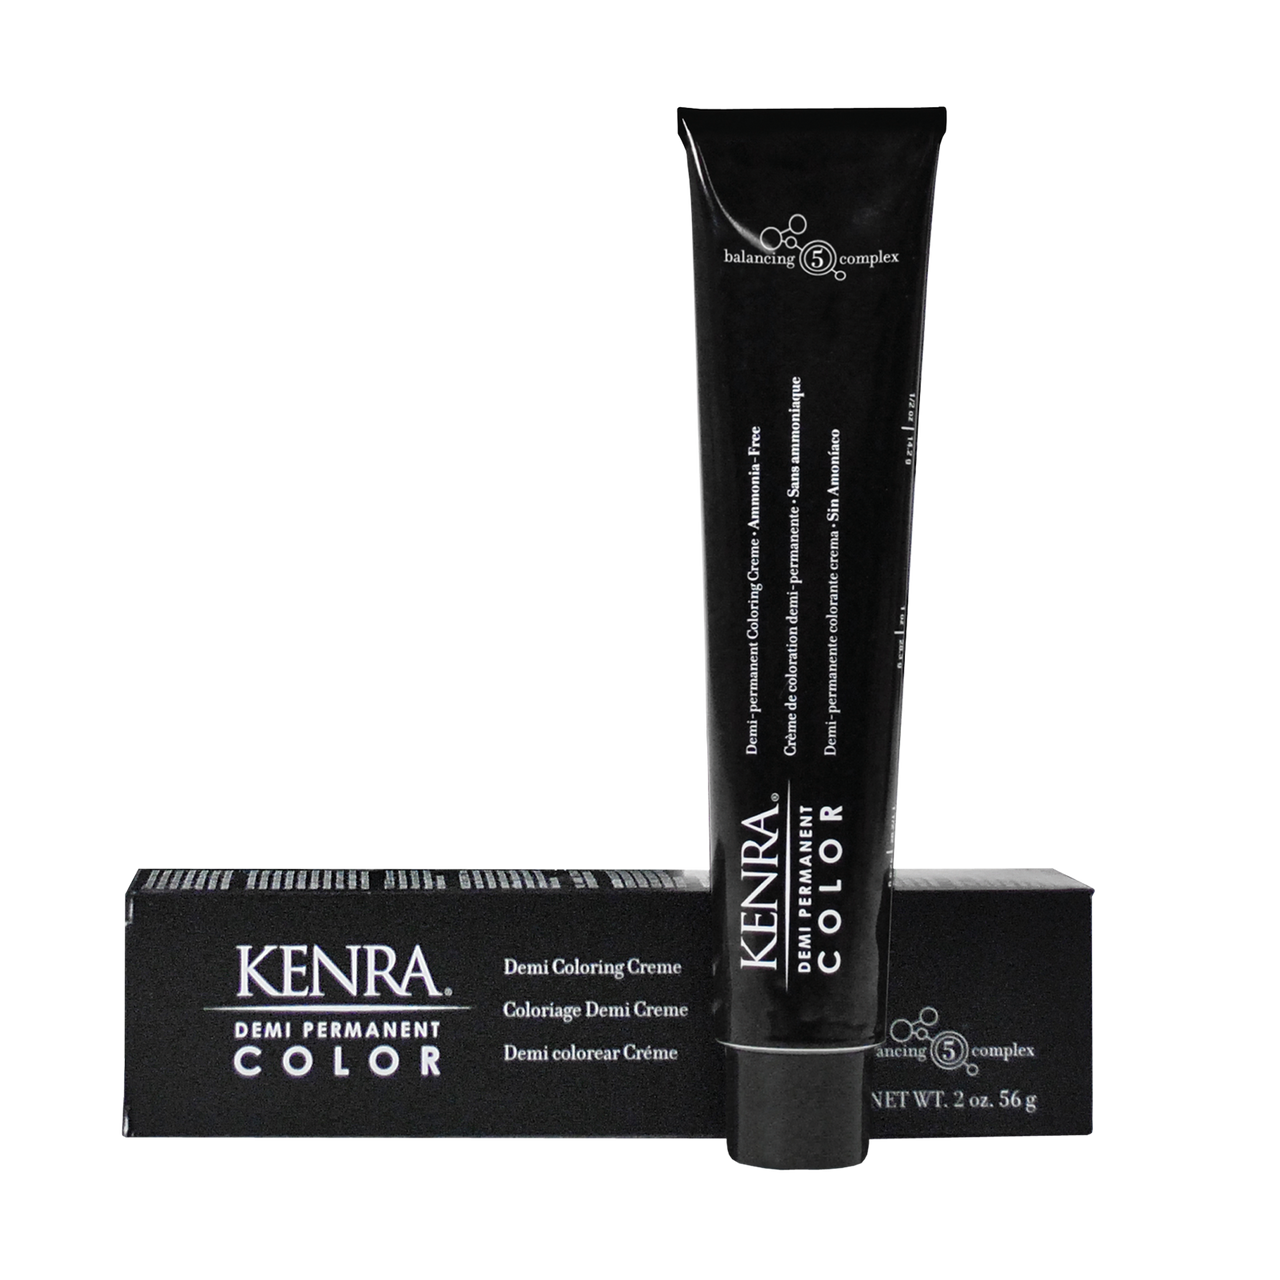 Kenra Professional 7CG Copper Gold